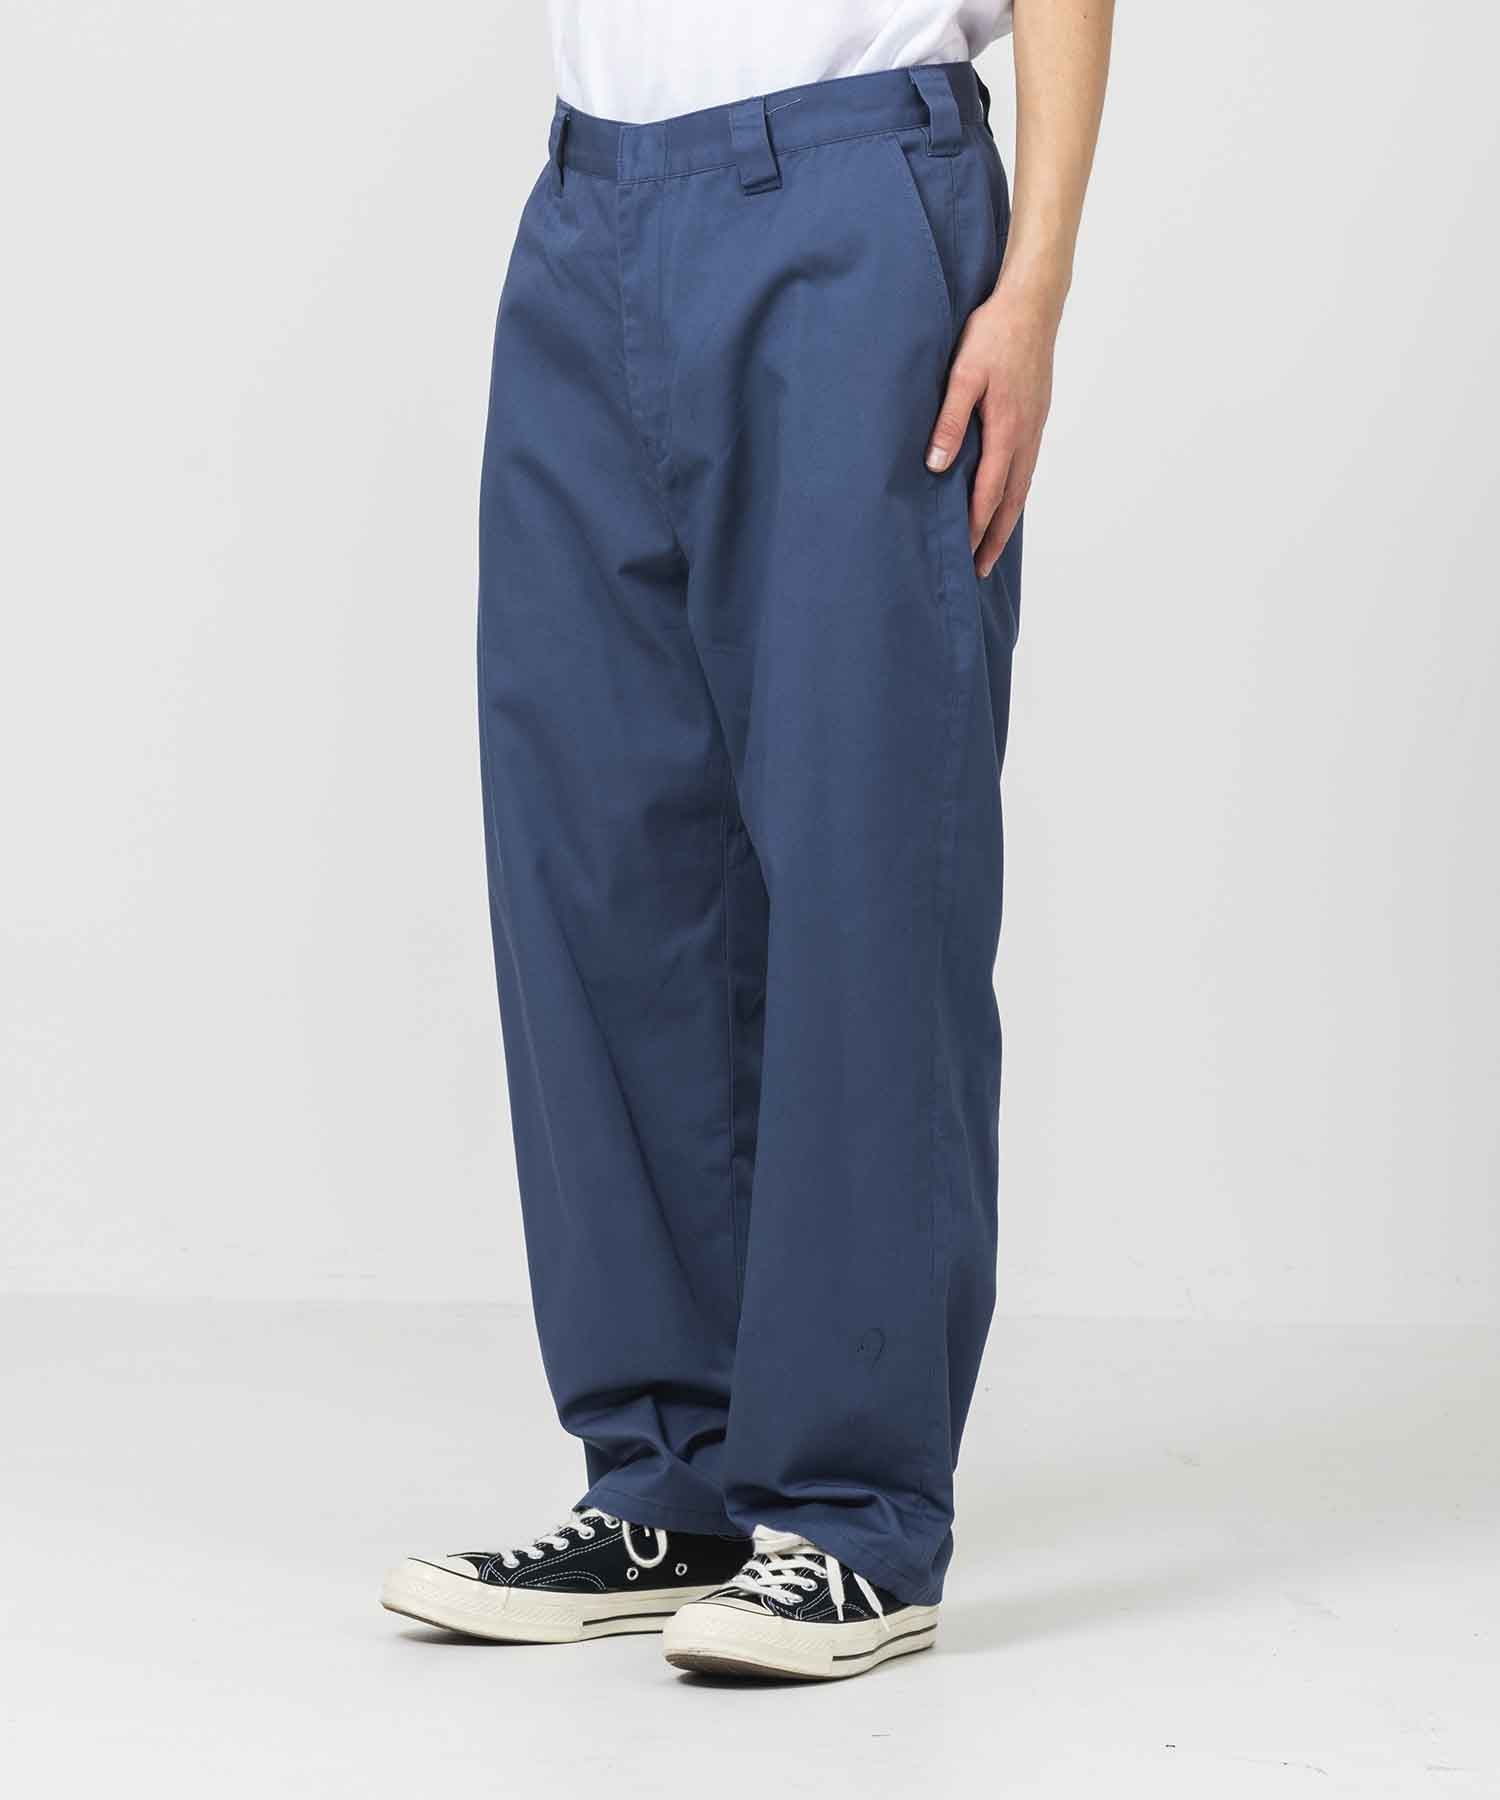 EMBROIDERY WORK PANTS